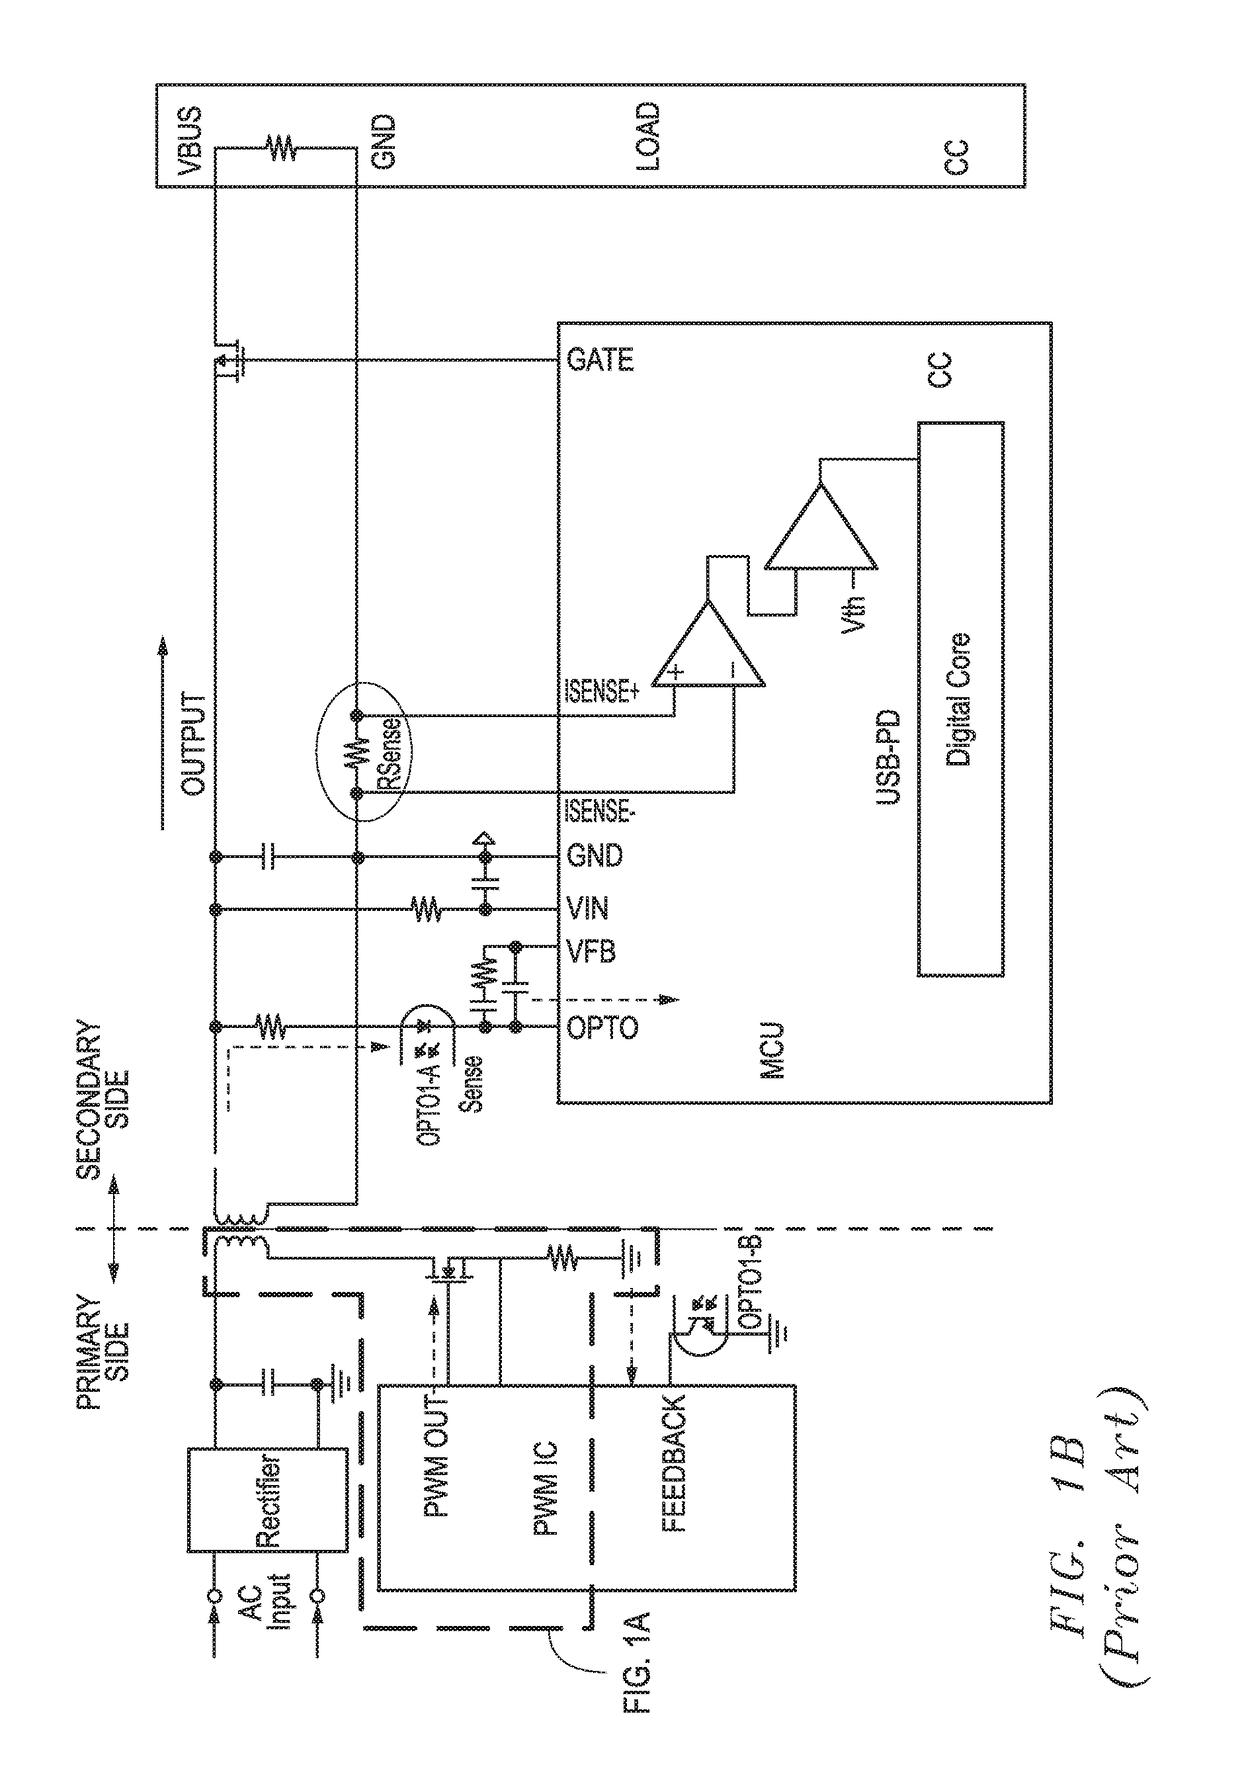 Systems and methods for diagnostic current shunt and overcurrent protection (OCP) for power supplies